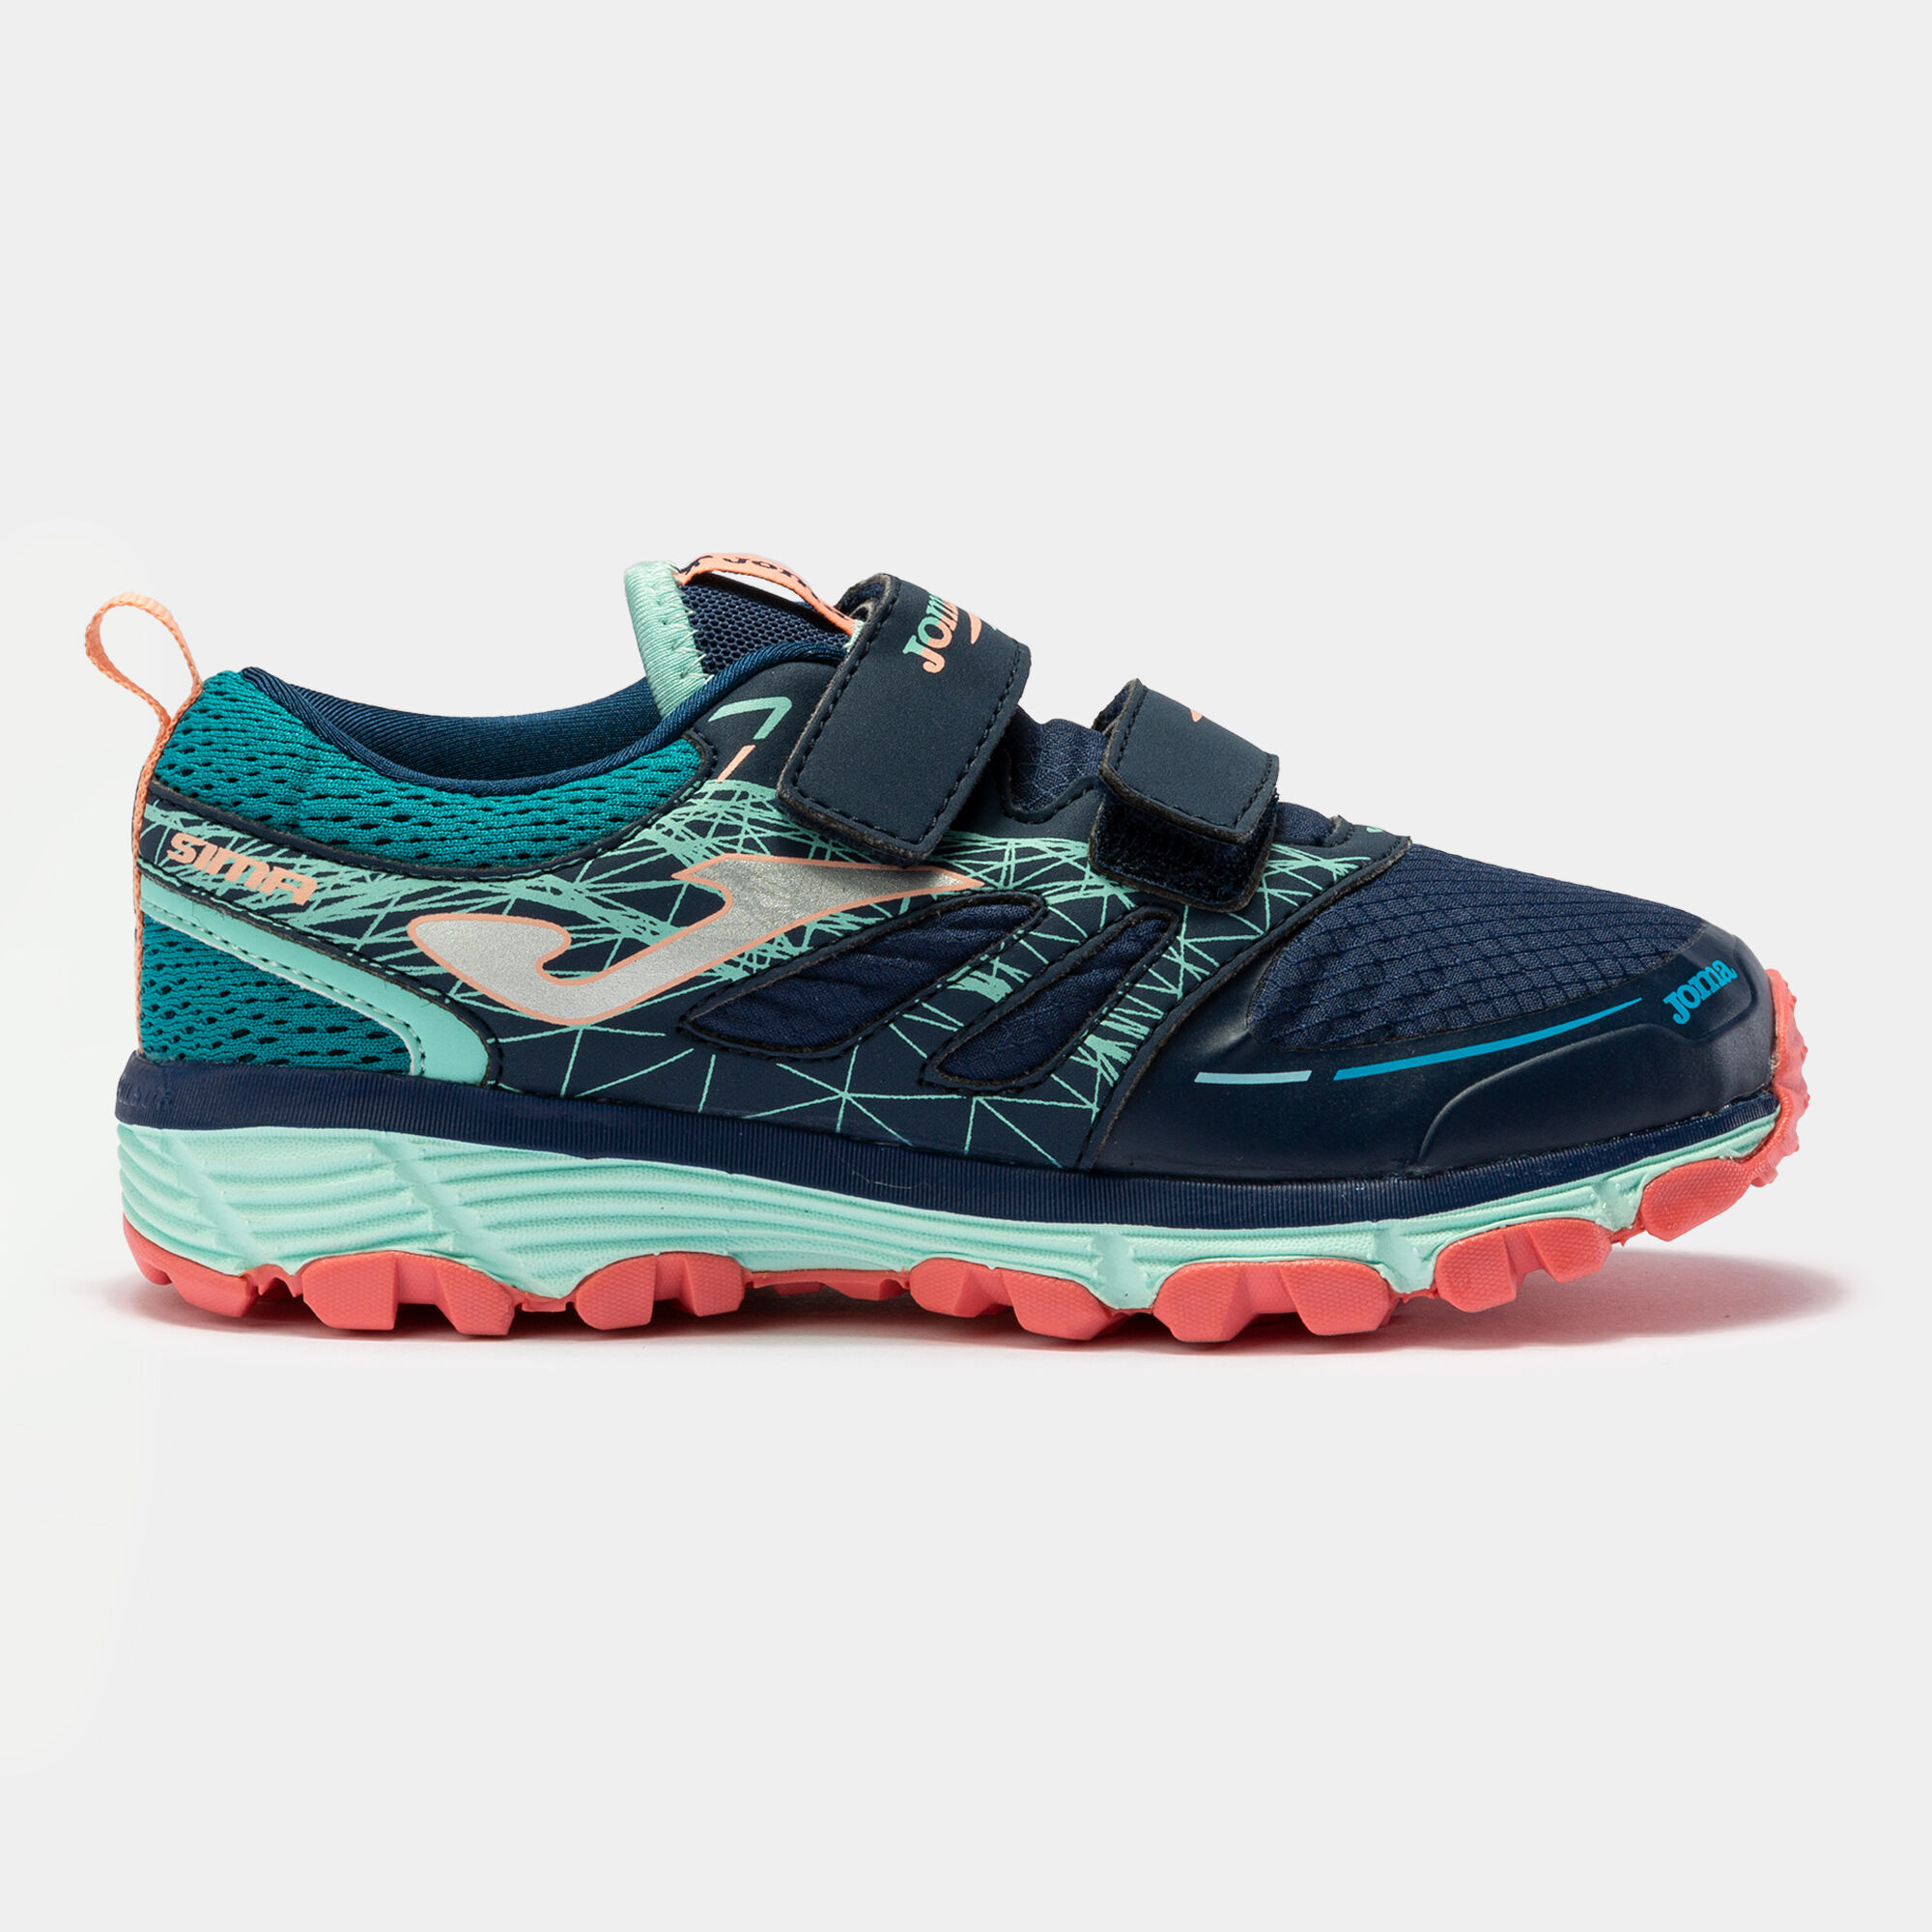 TRAIL-RUNNING SHOES SIMA 22 JUNIOR NAVY BLUE TURQUOISE